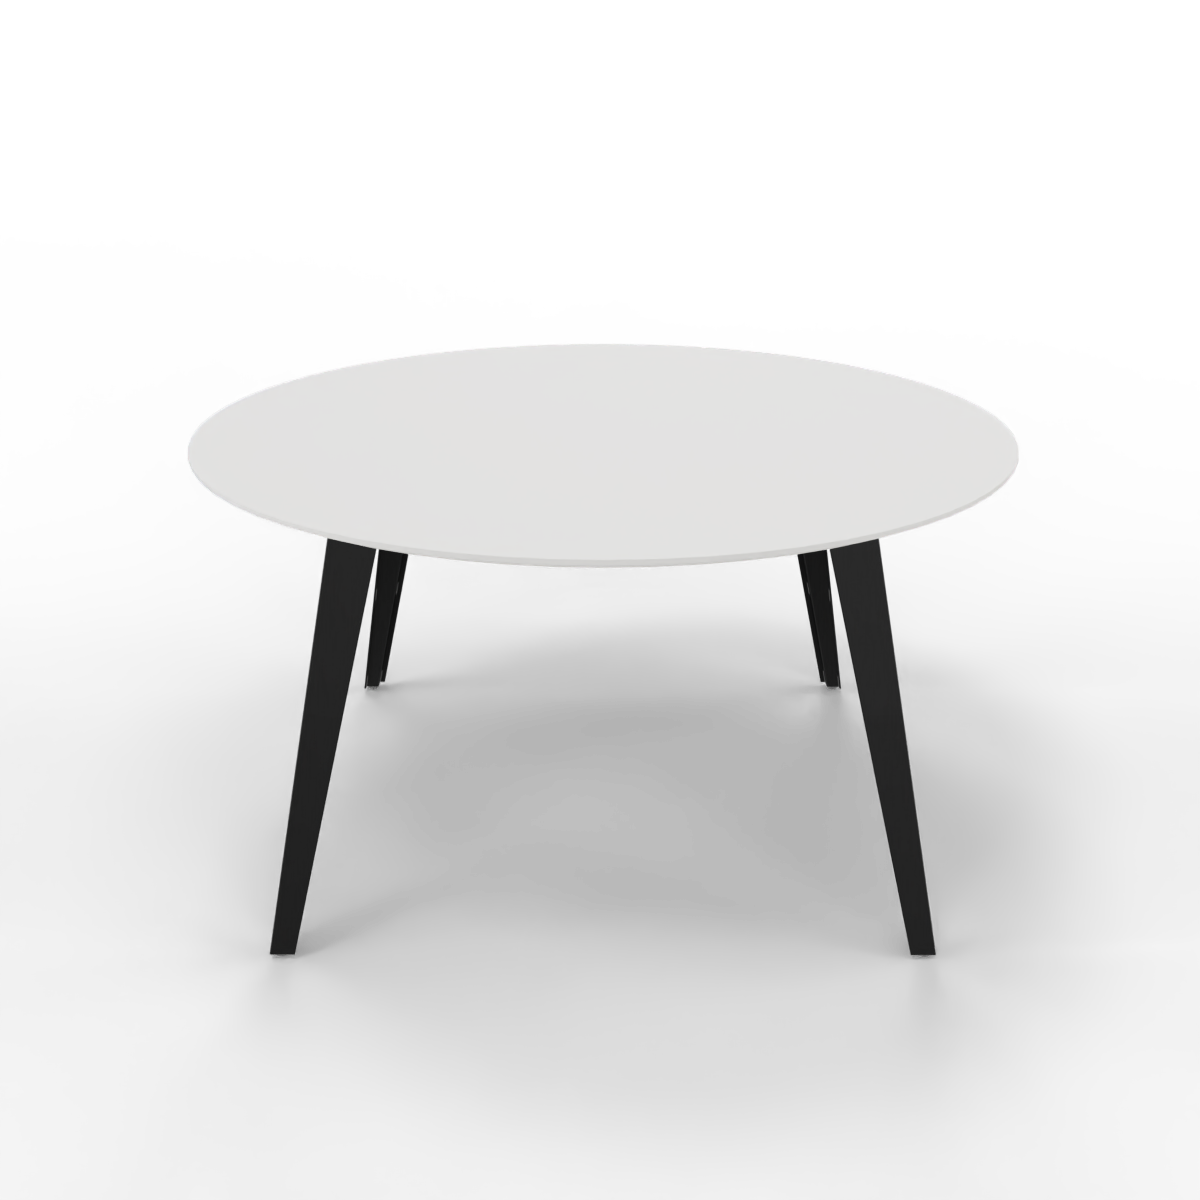 Spider conference table round